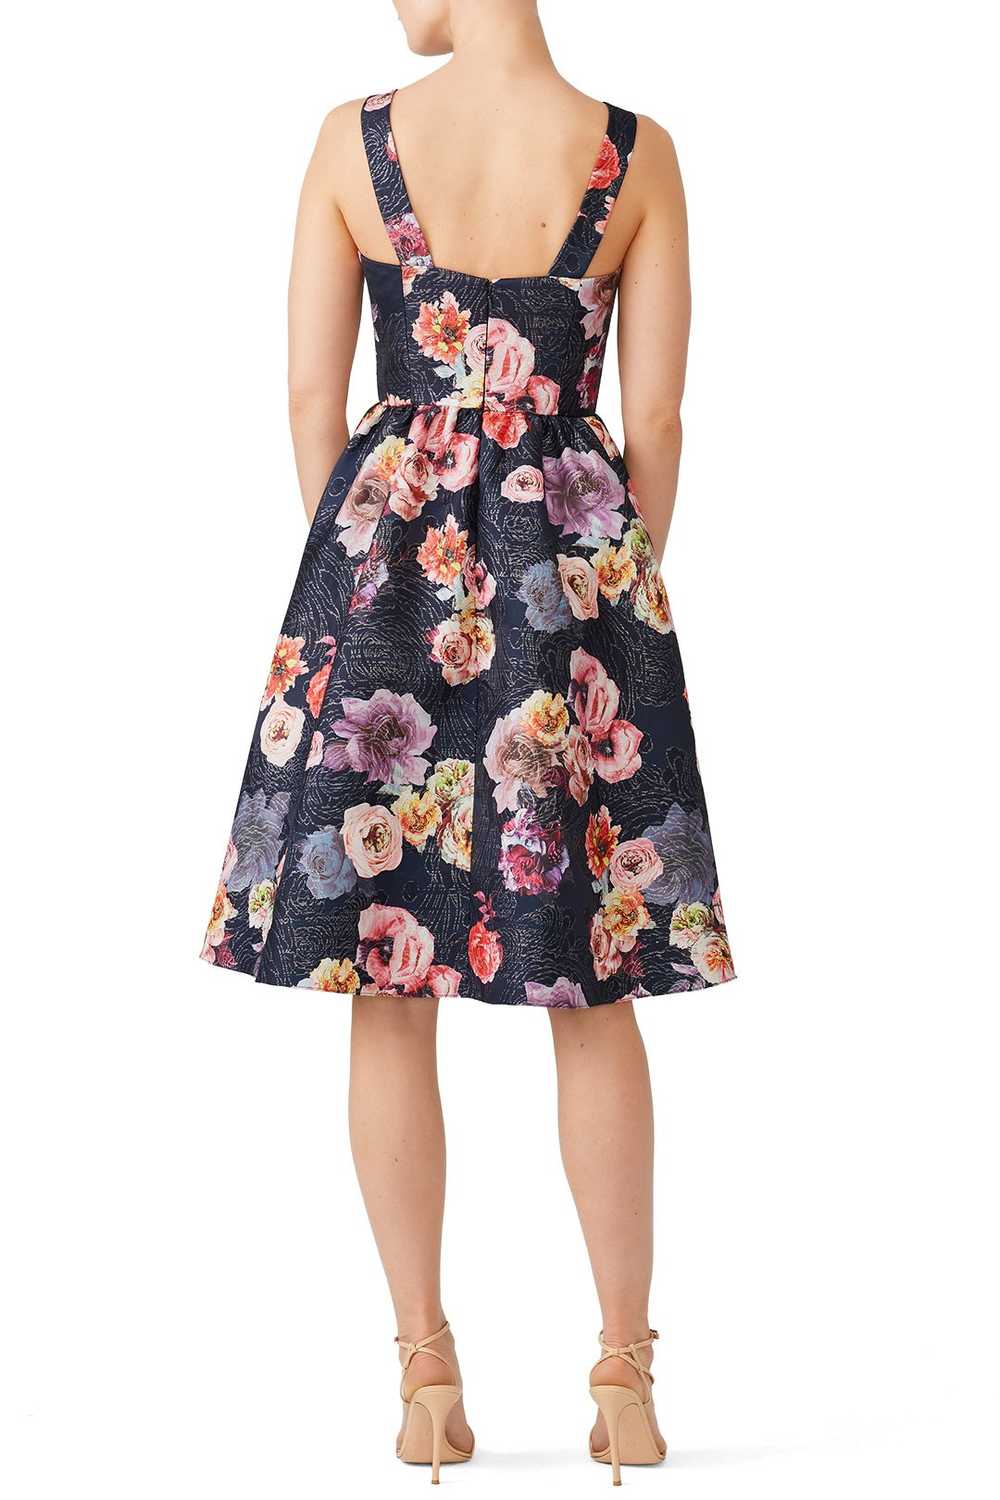 Christian Siriano Black Floral Cocktail Dress - image 2